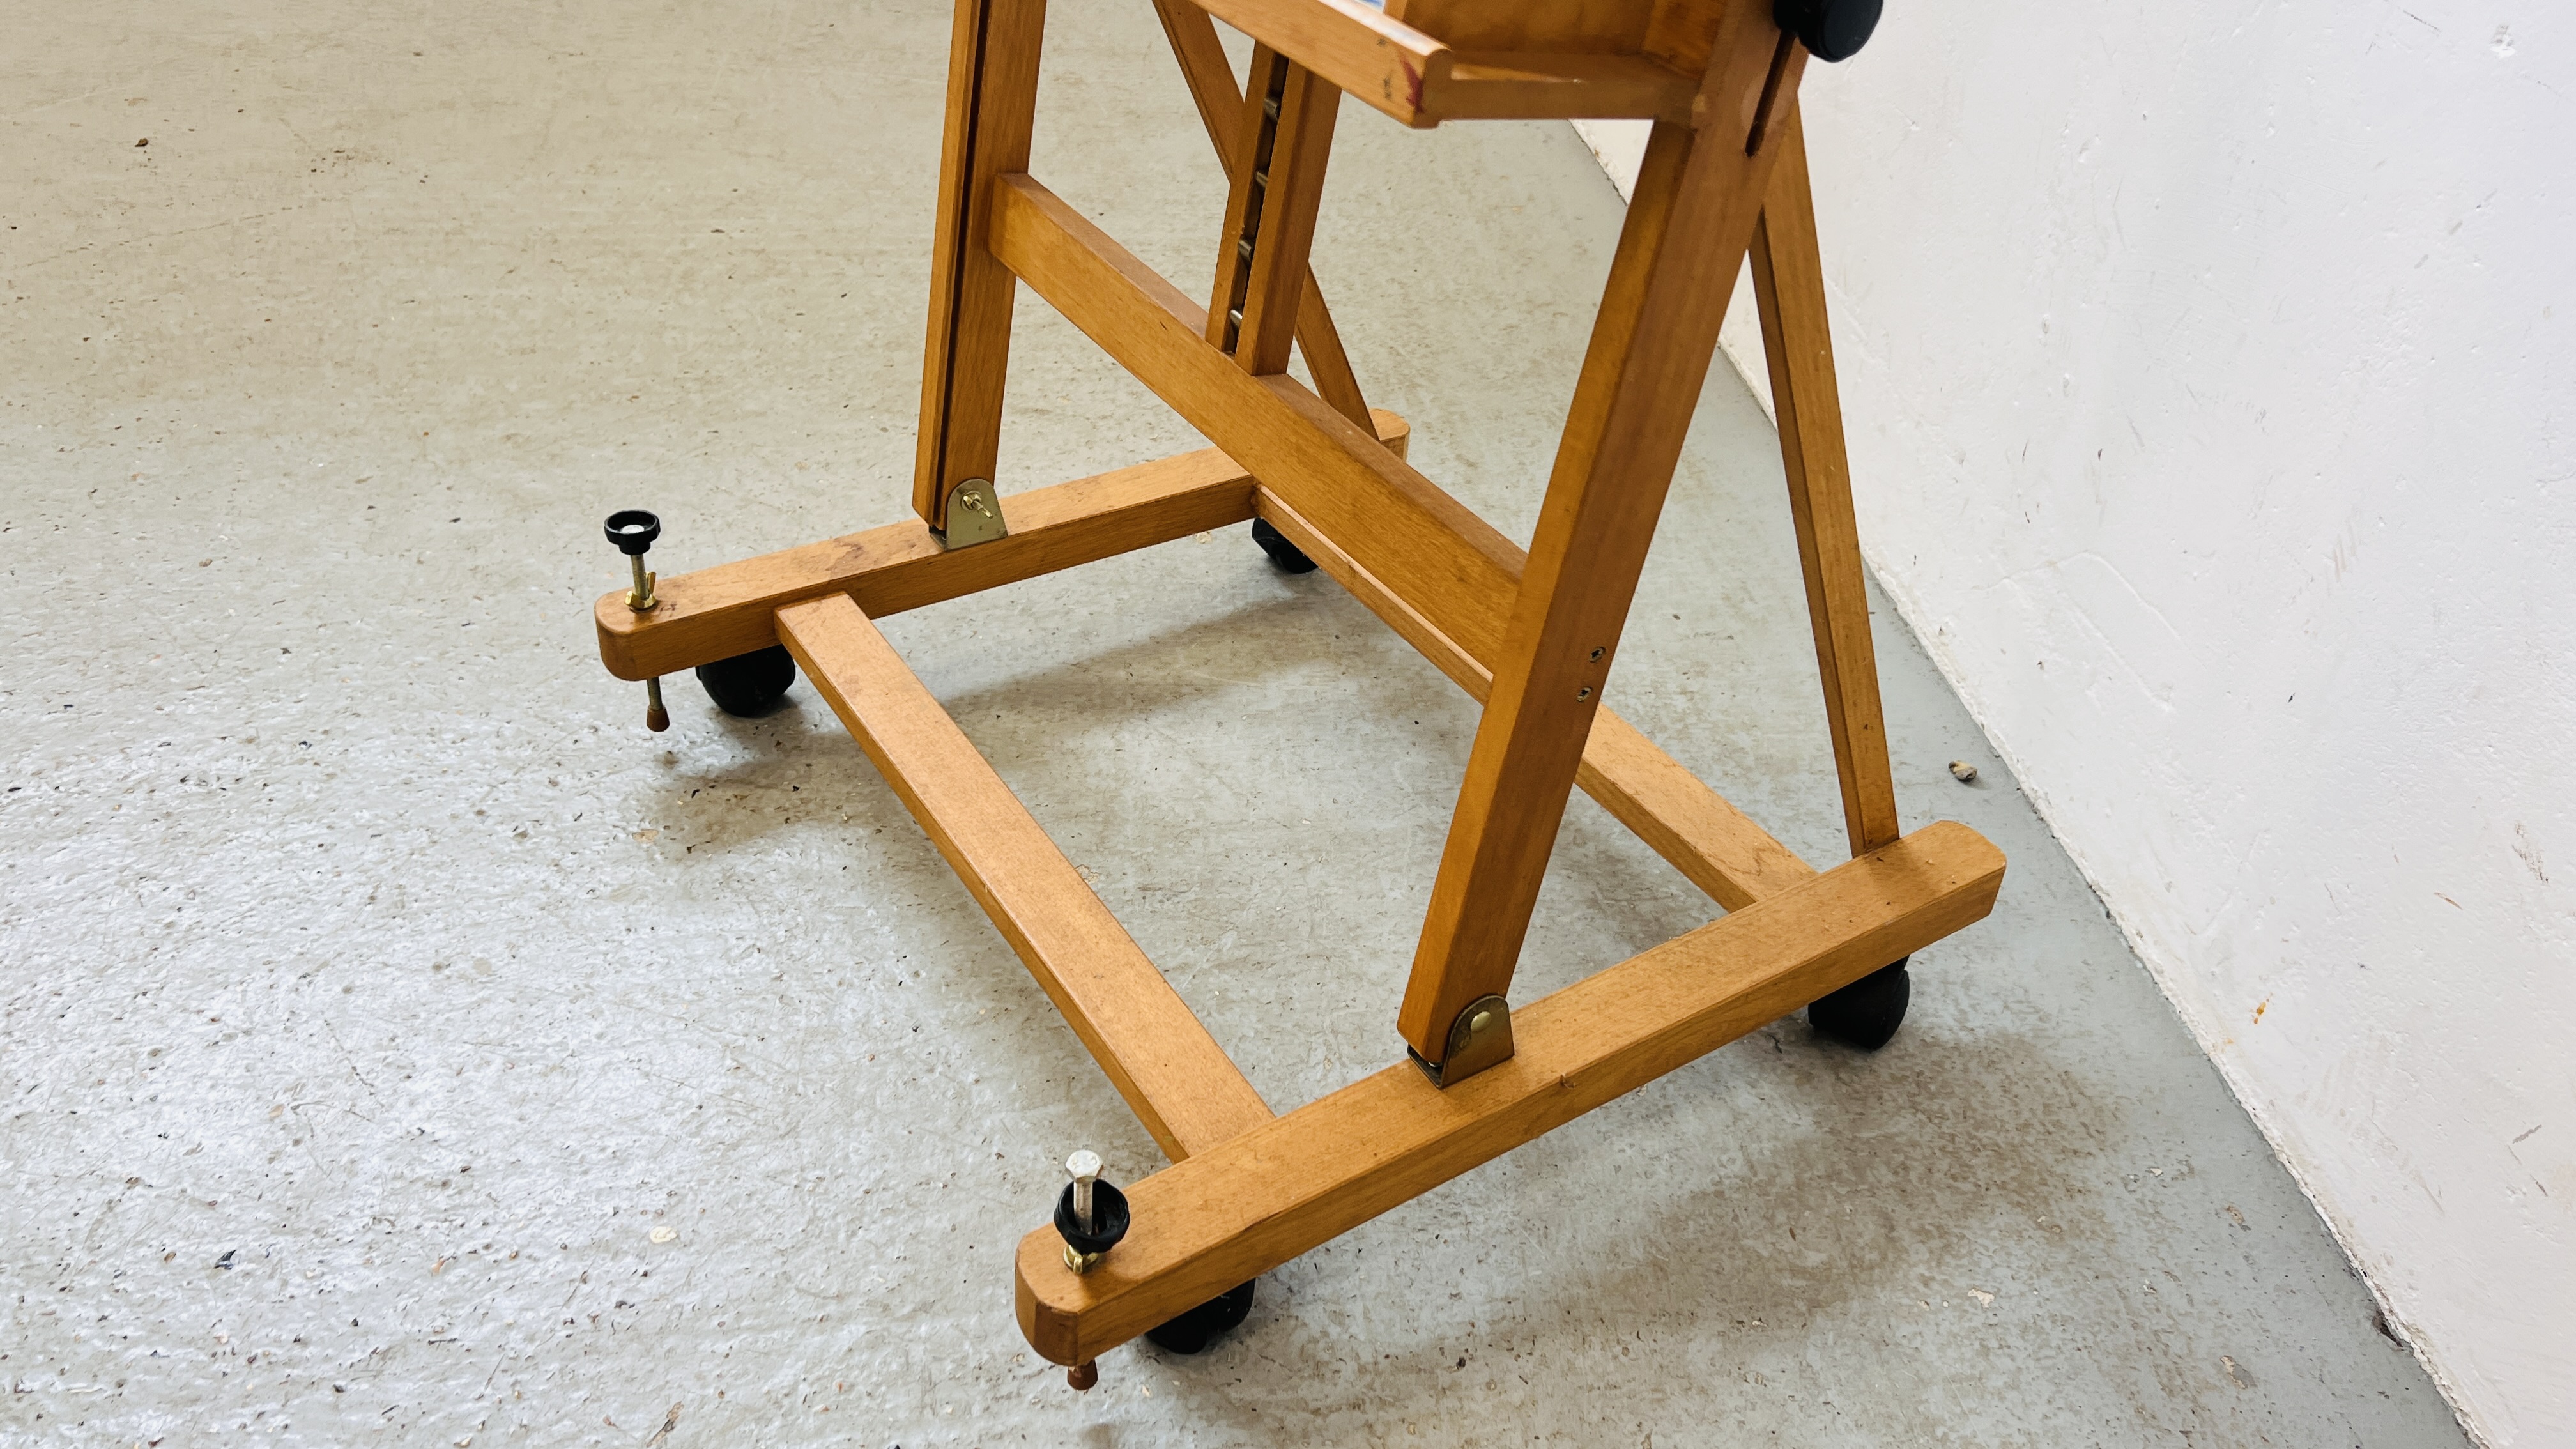 A WINDSOR AND NEWTON LARGE ARTISTS EASEL WITH ADJUSTABLE SHELF AND REVOLVING STOOL - Image 5 of 7